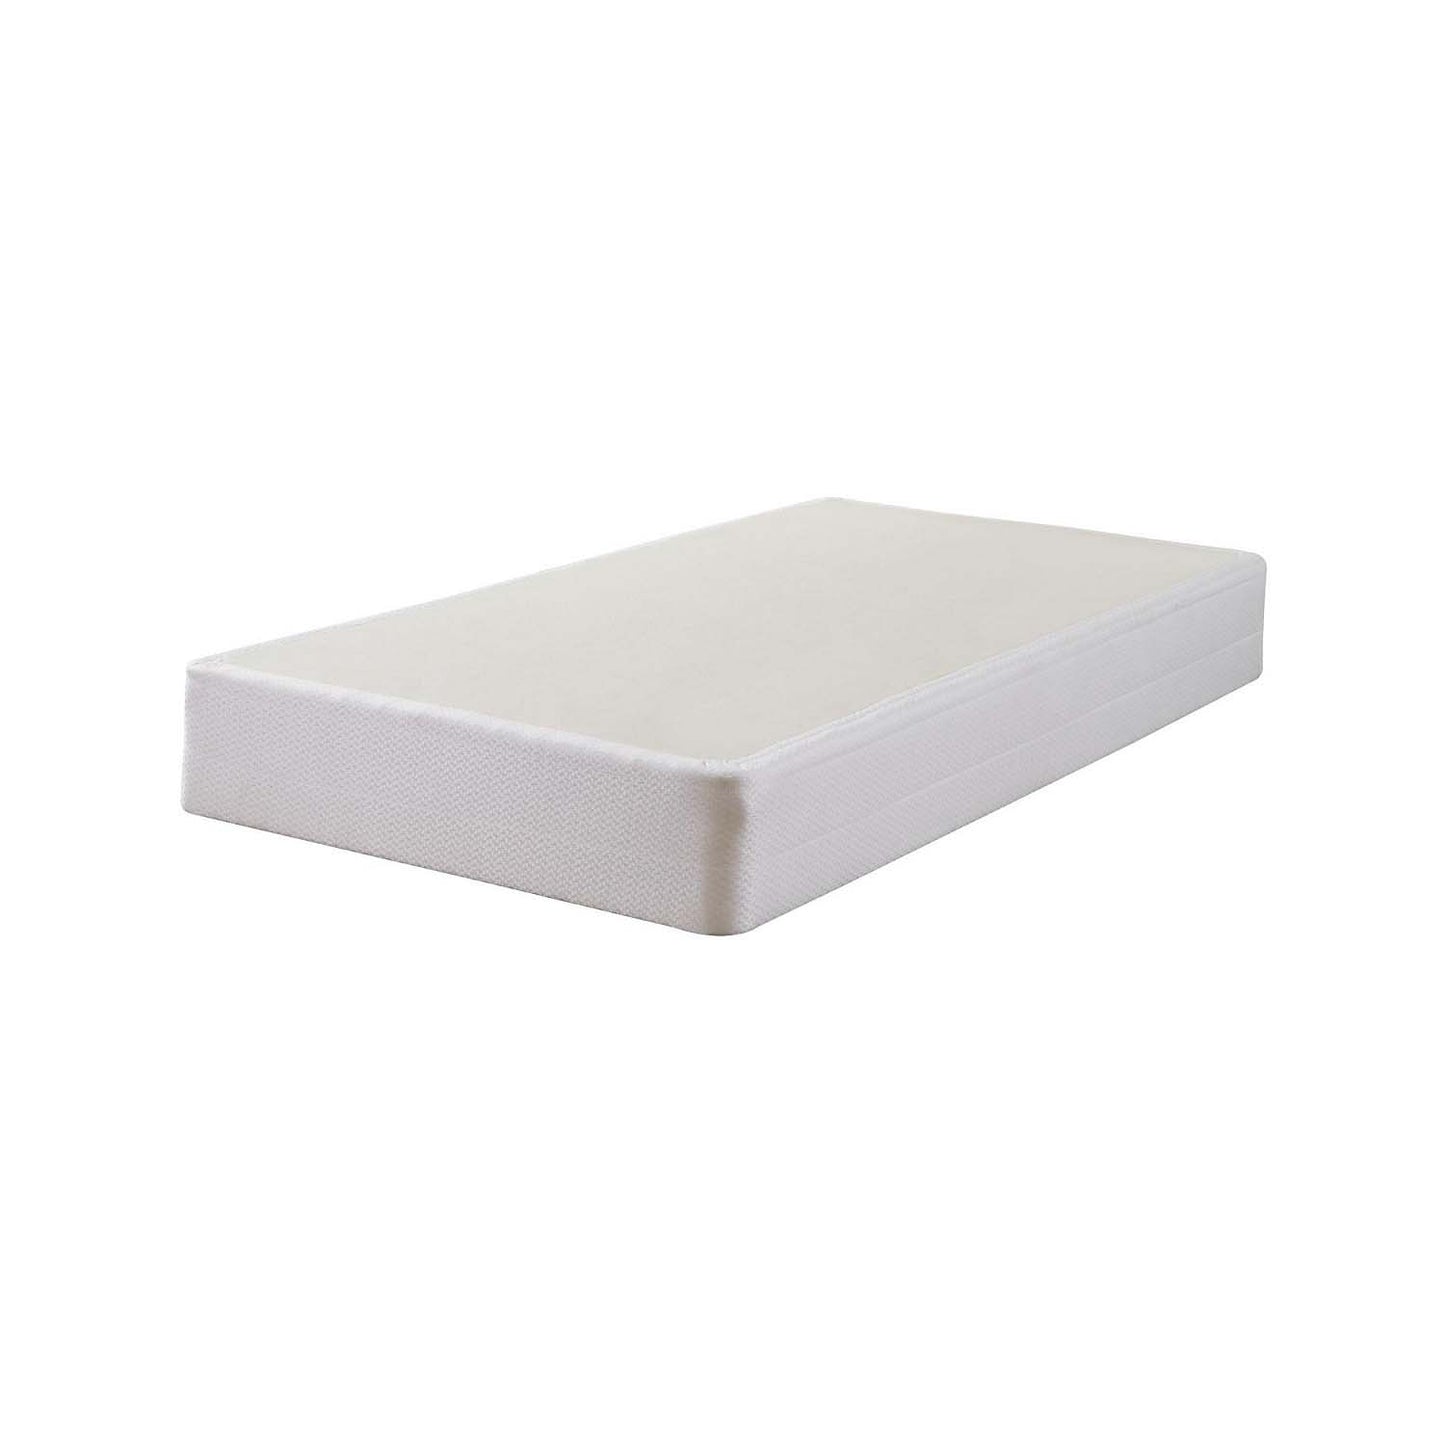 Twin Foundation by Golden Mattress Company